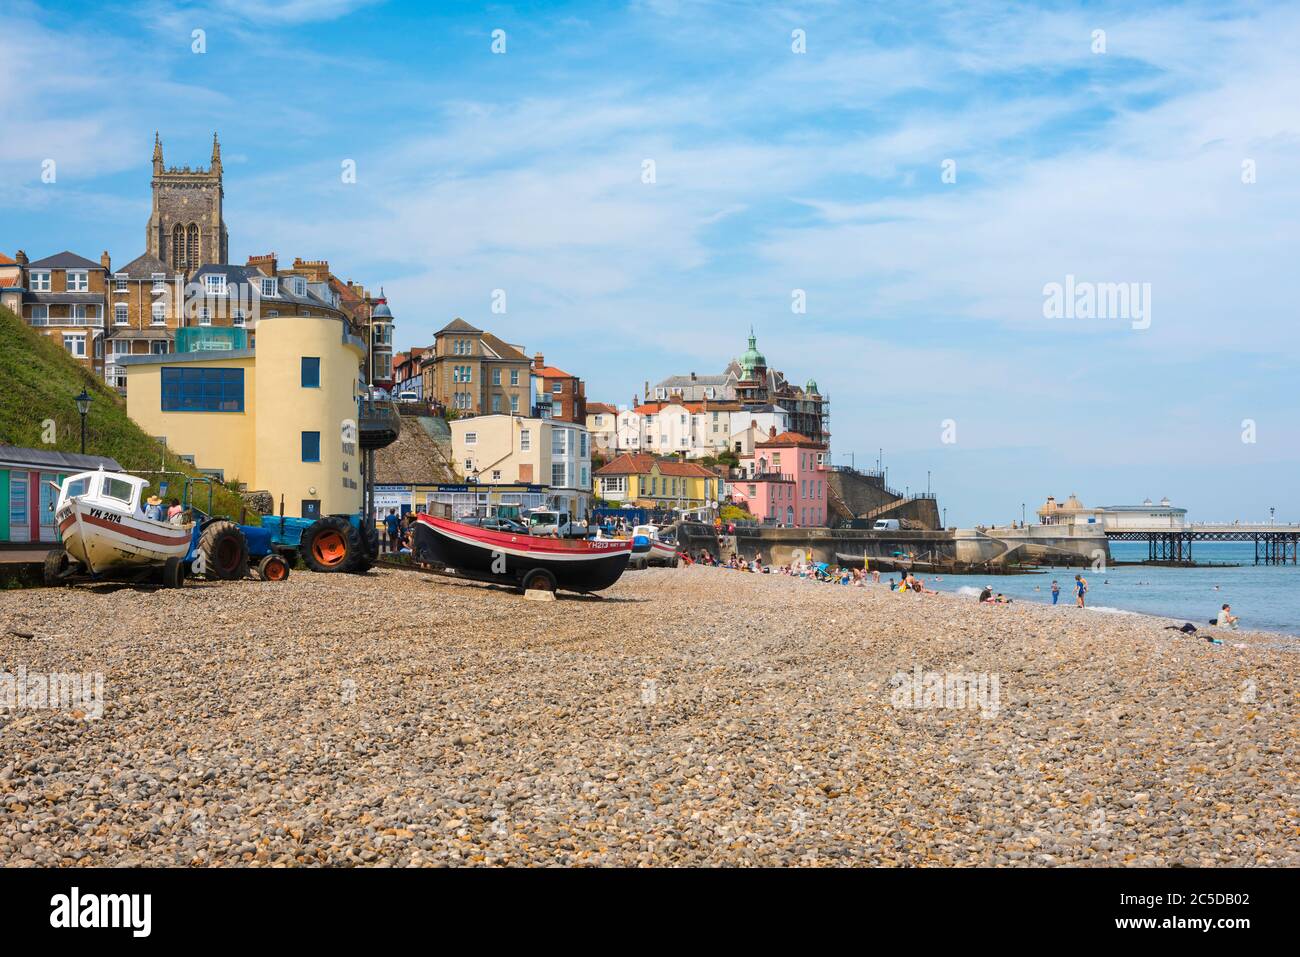 Cromer beach UK, view in summer of people sunbathing on the beach at Cromer on the north Norfolk coast, East Anglia, England, UK. Stock Photo